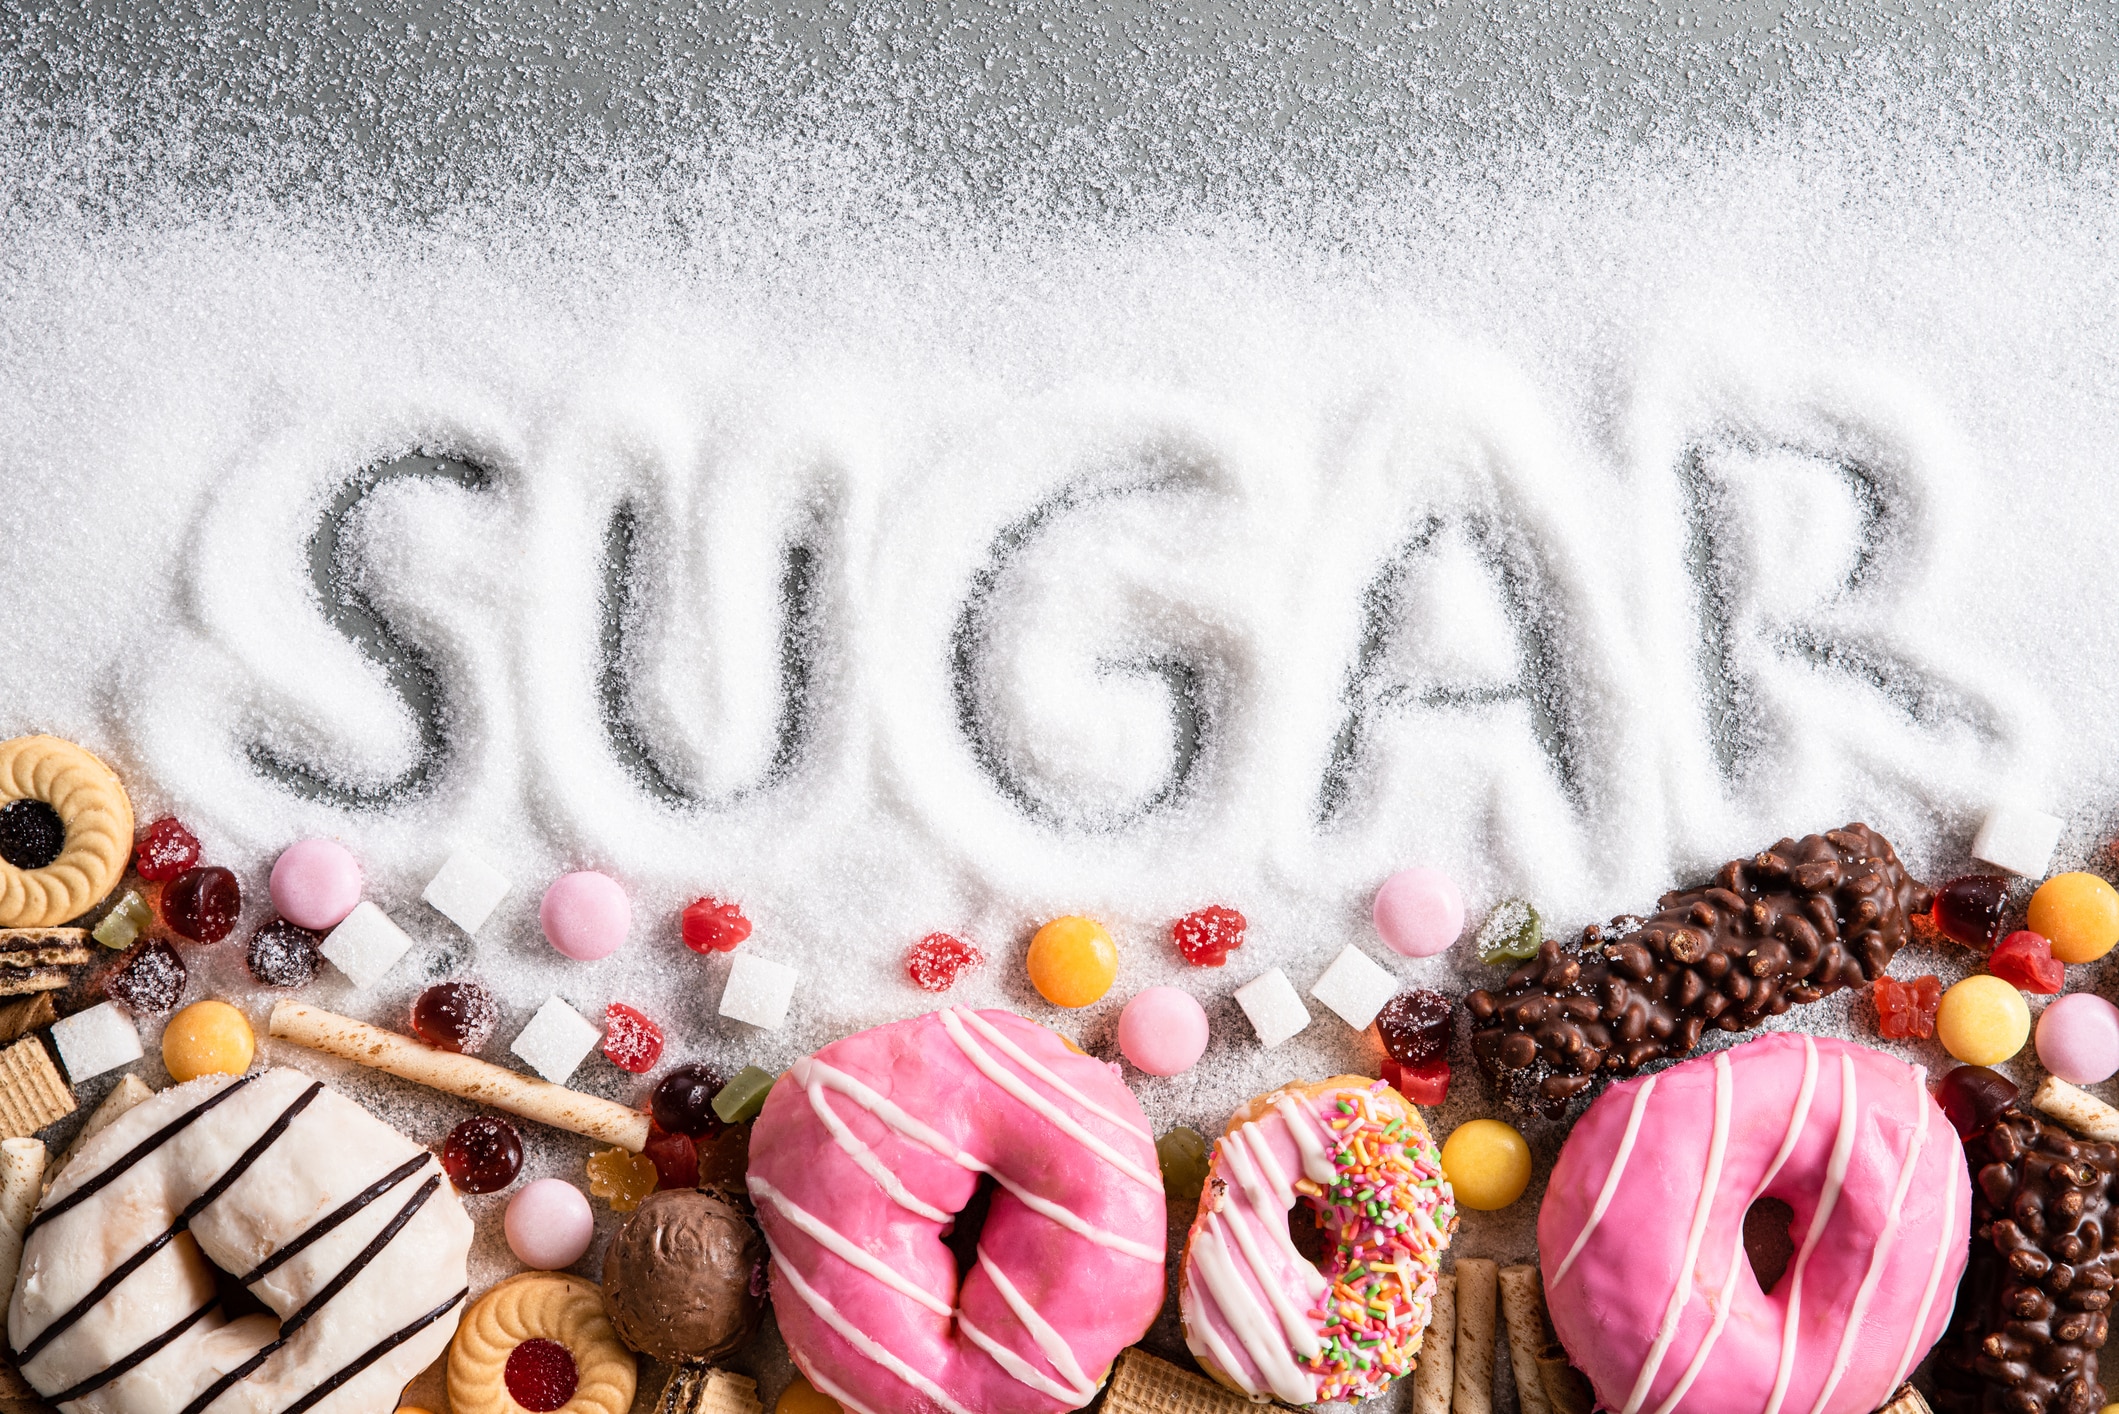 WHAT WILL IT MEAN IF ADDED SUGARS HAVE TO BE INCLUDED ON FOOD LABELLING IN AUSTRALIA?